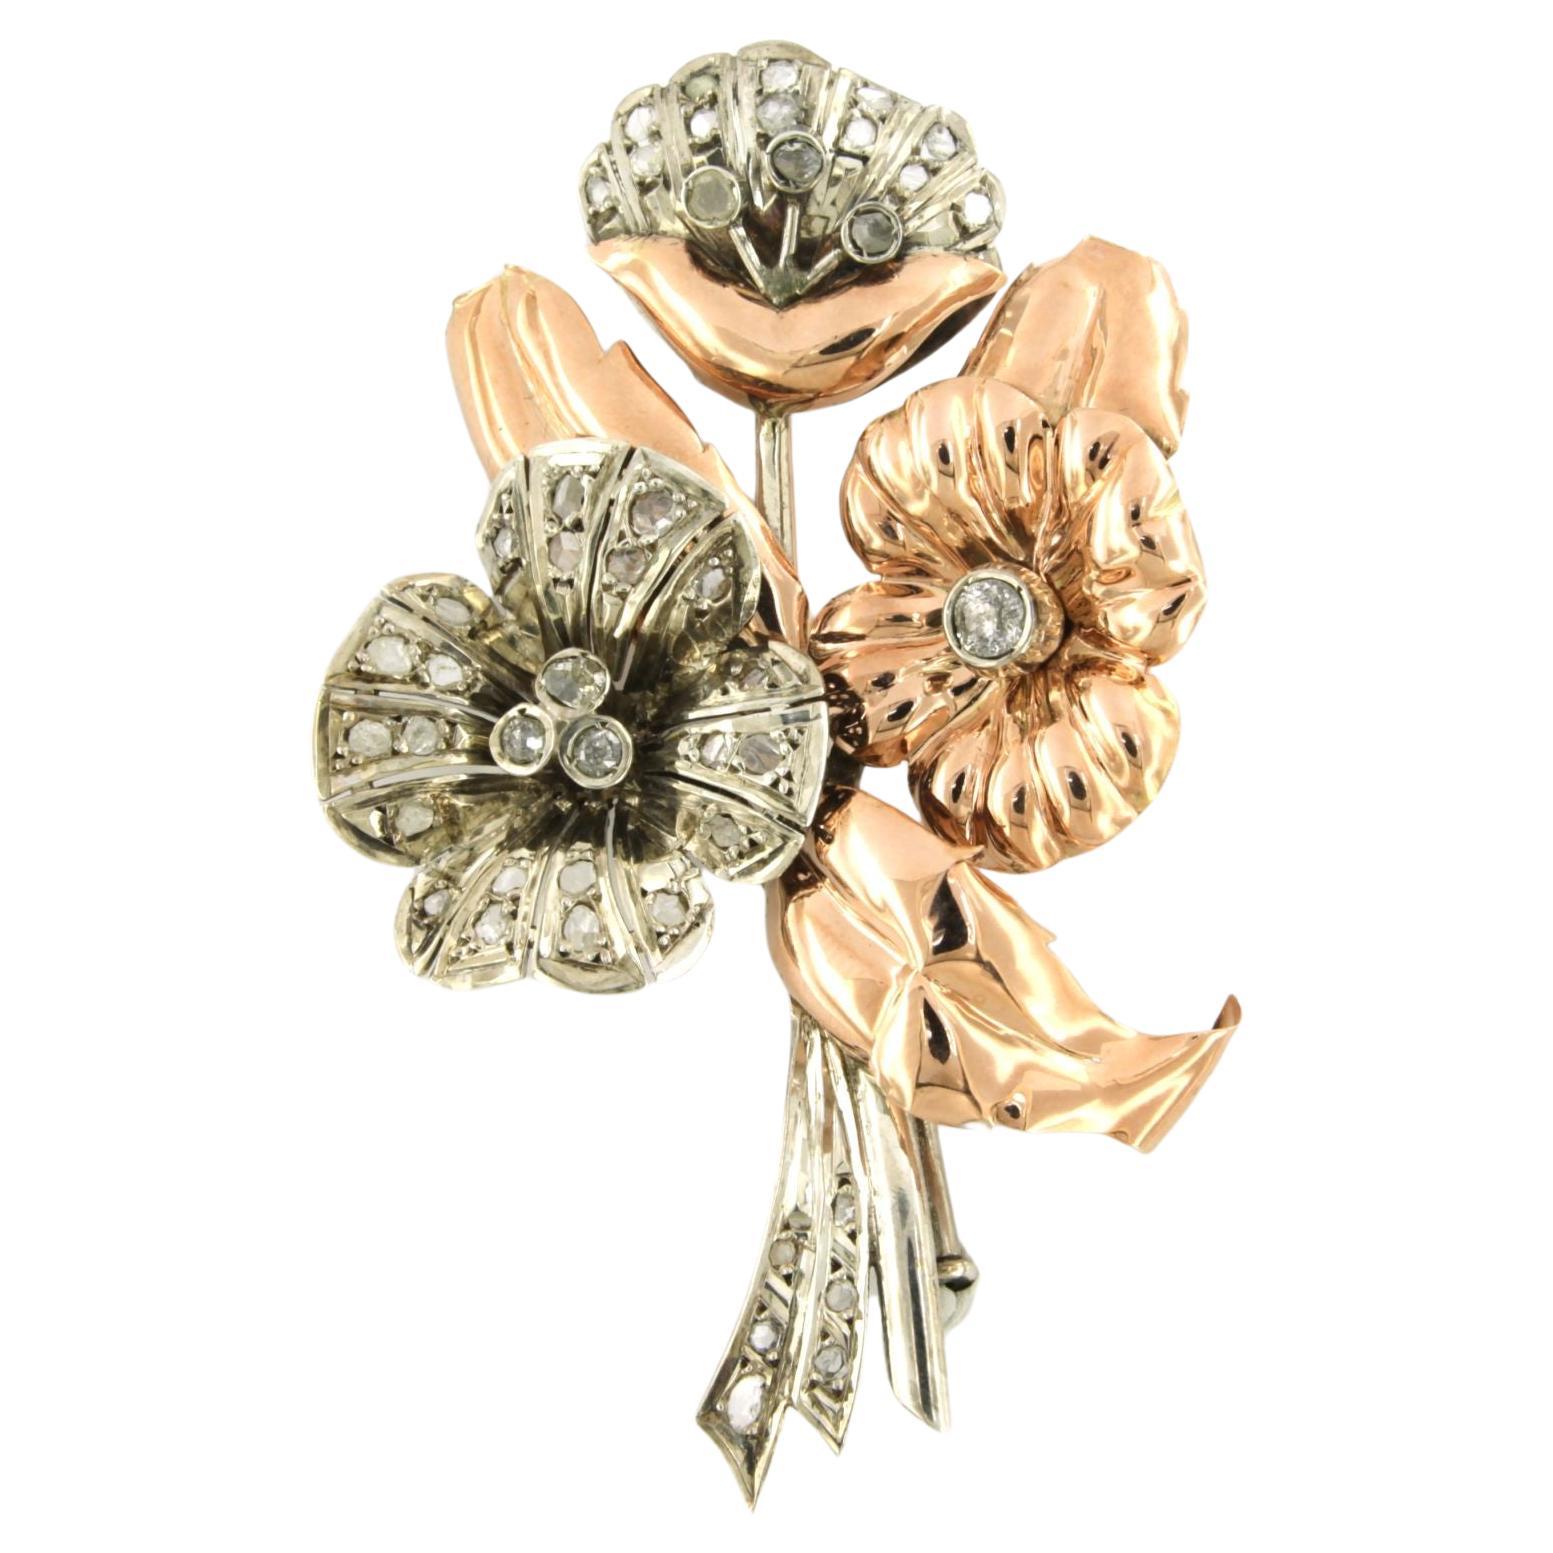 Retro Brooch set with Diamonds pink gold and silver